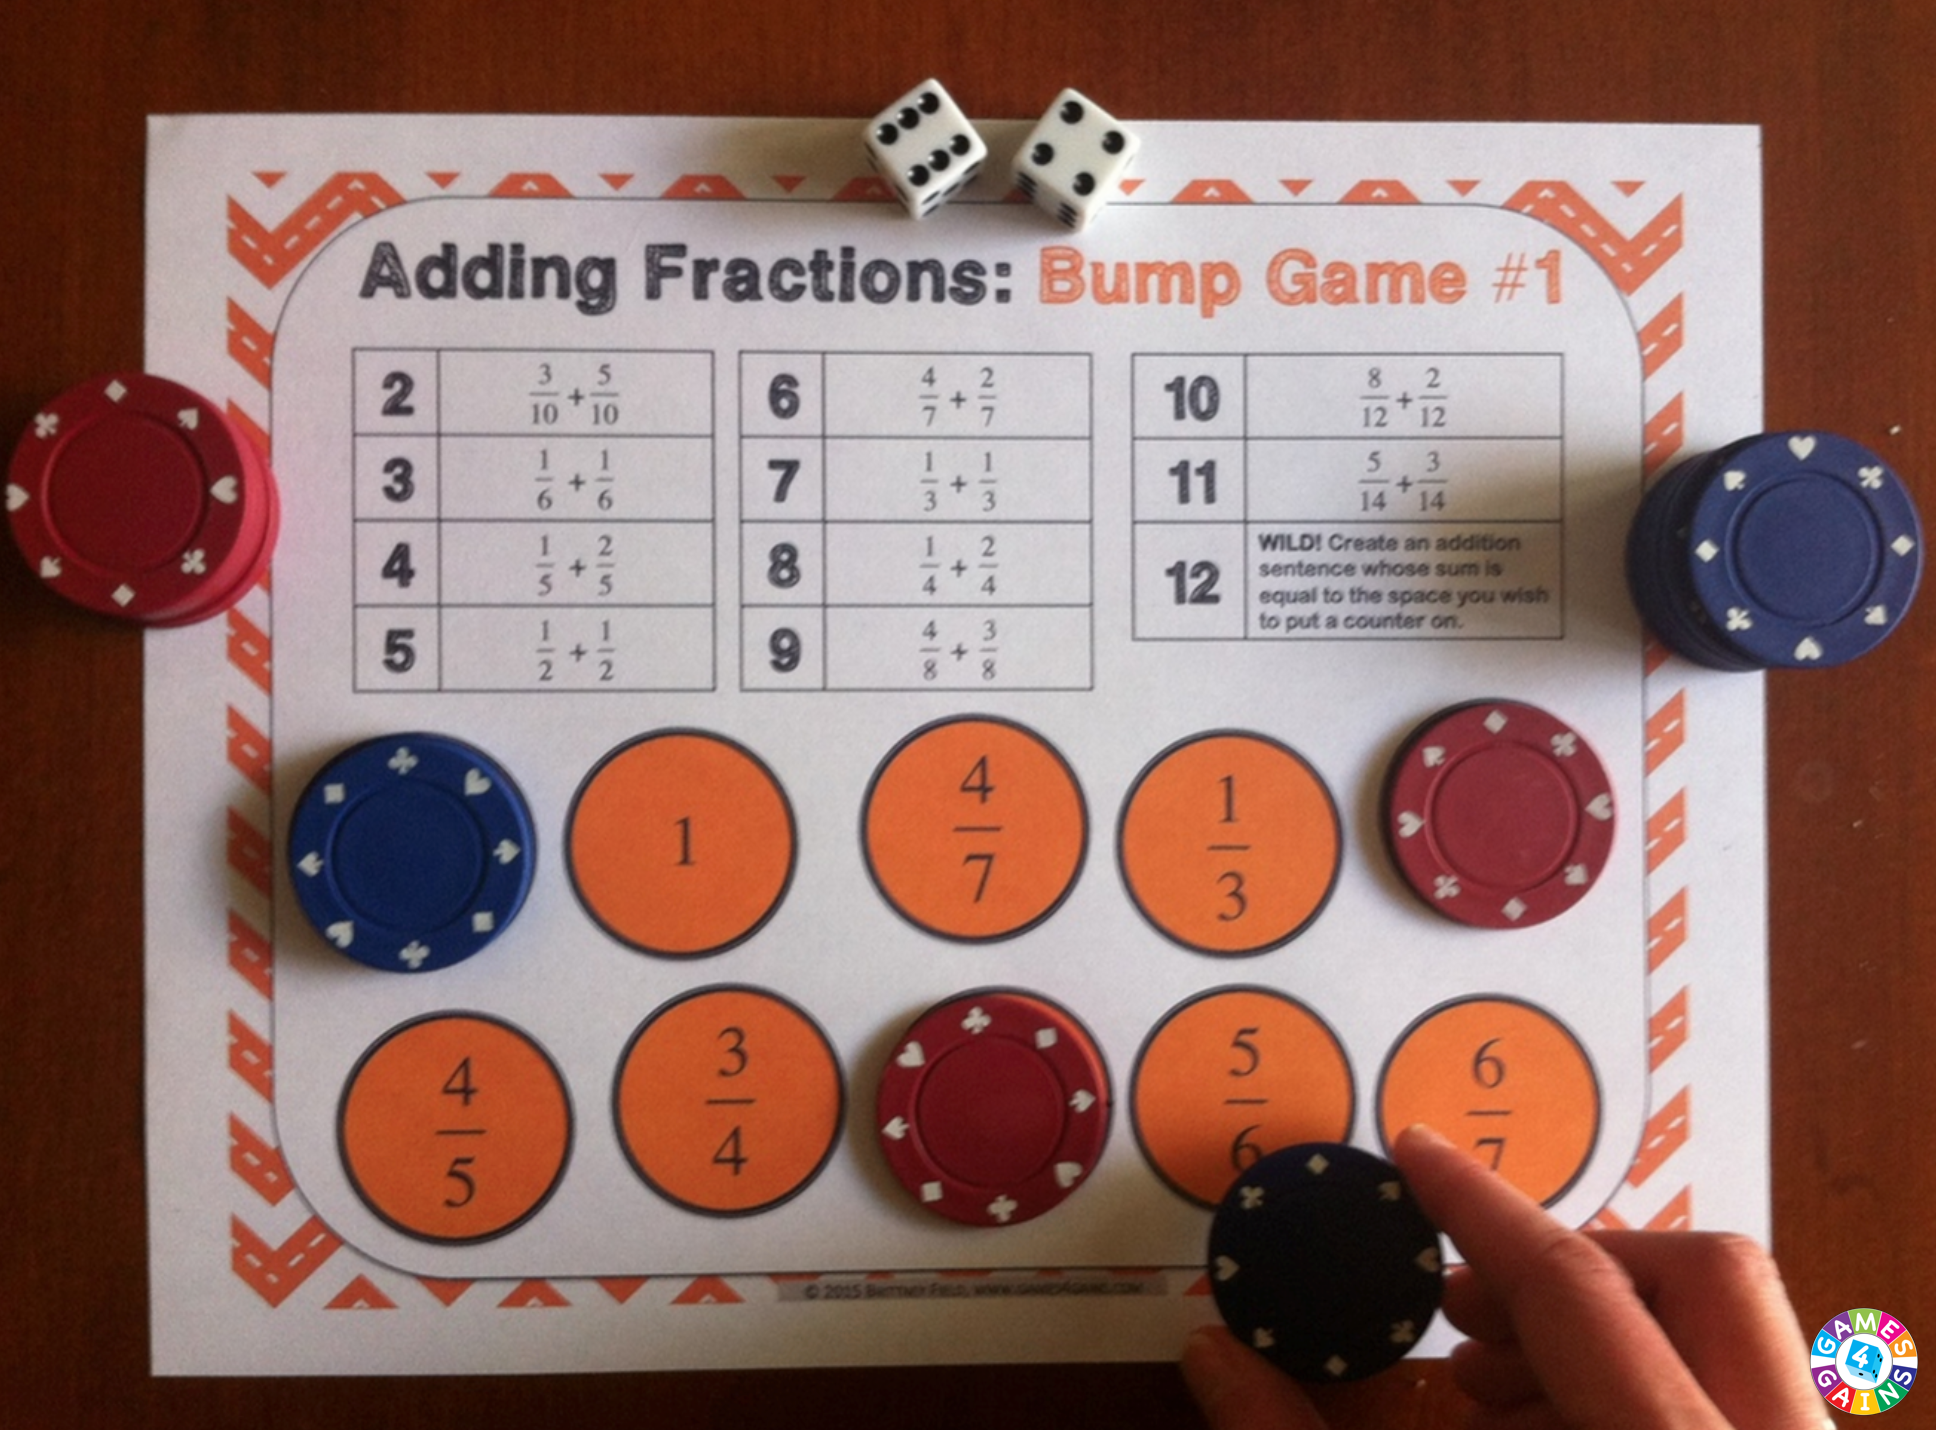 'Bump' Up the Fun With Fractions! – Games 4 Gains